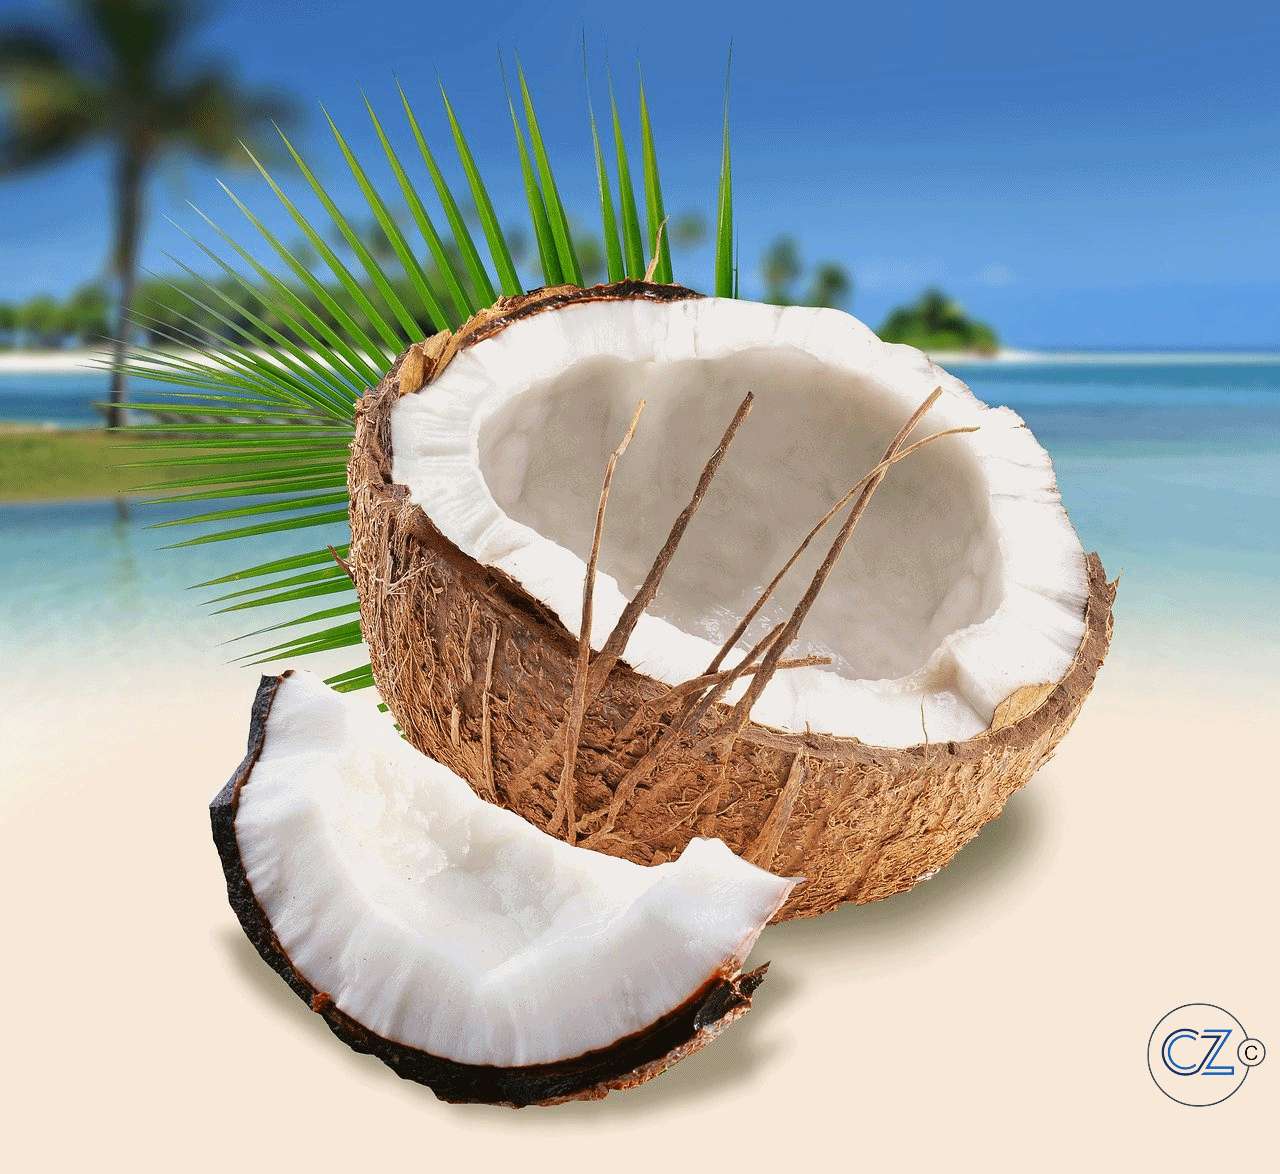 Coconuts on the beach jigsaw puzzle online